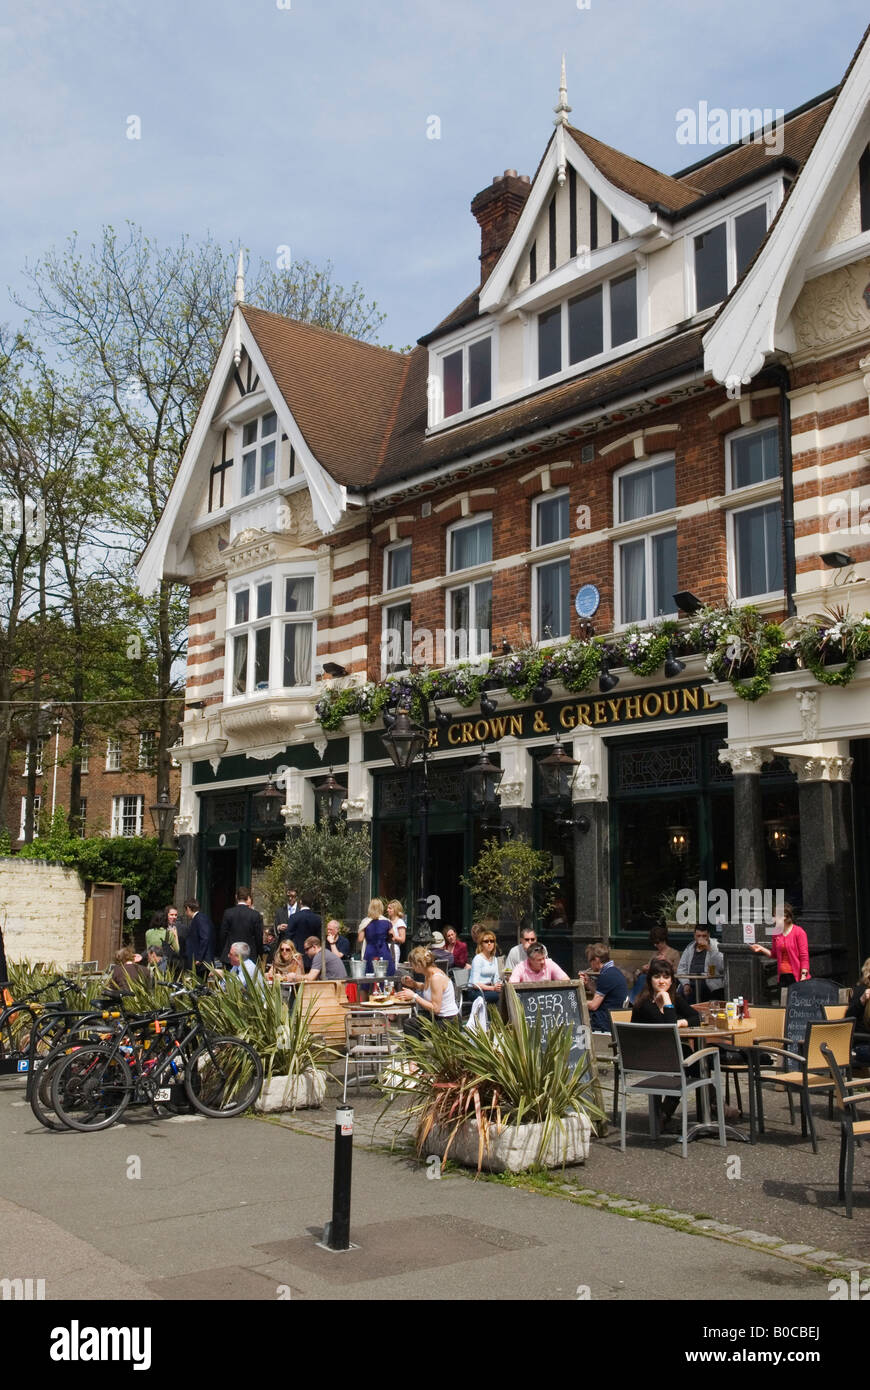 Dulwich Village South London SE21 London UK College Road The Crown and Greyhound Public House people summer sunshine HOMER SYKES Stock Photo